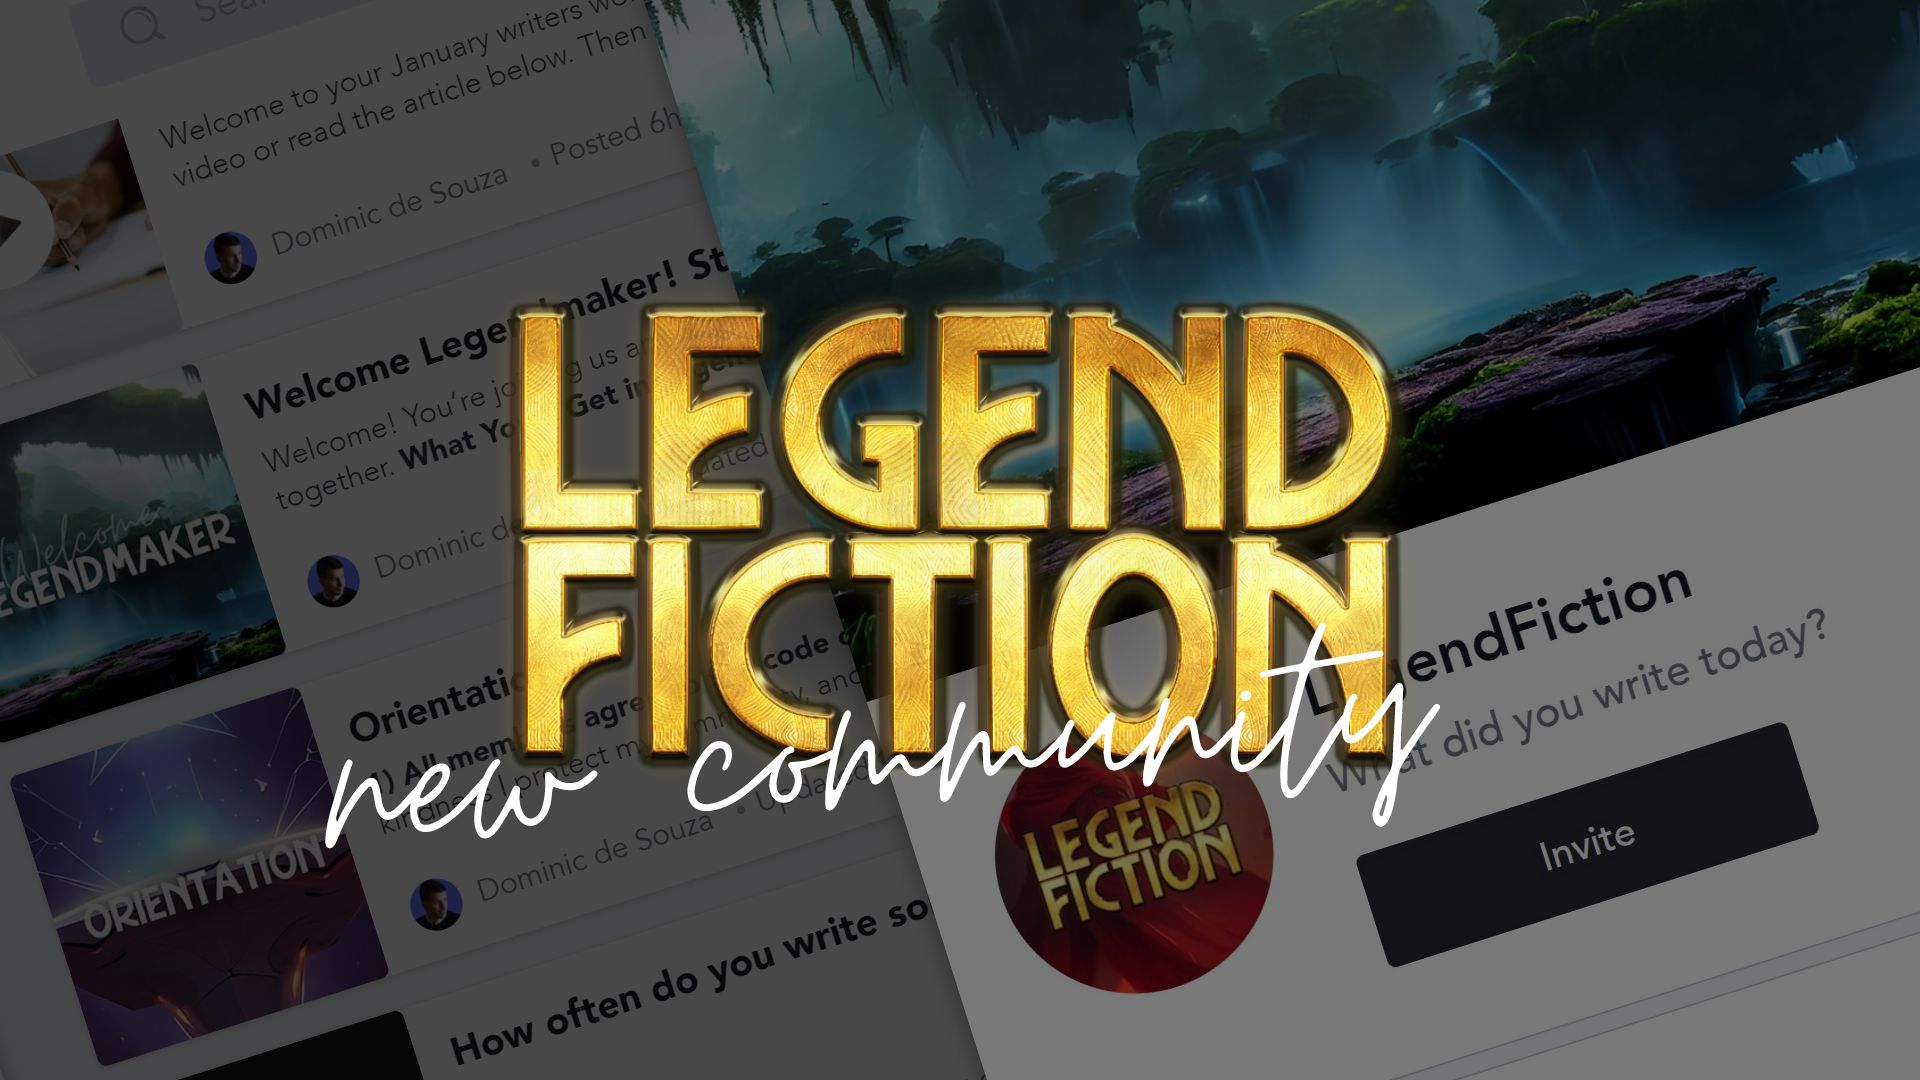 Announcing: the new LegendFiction community